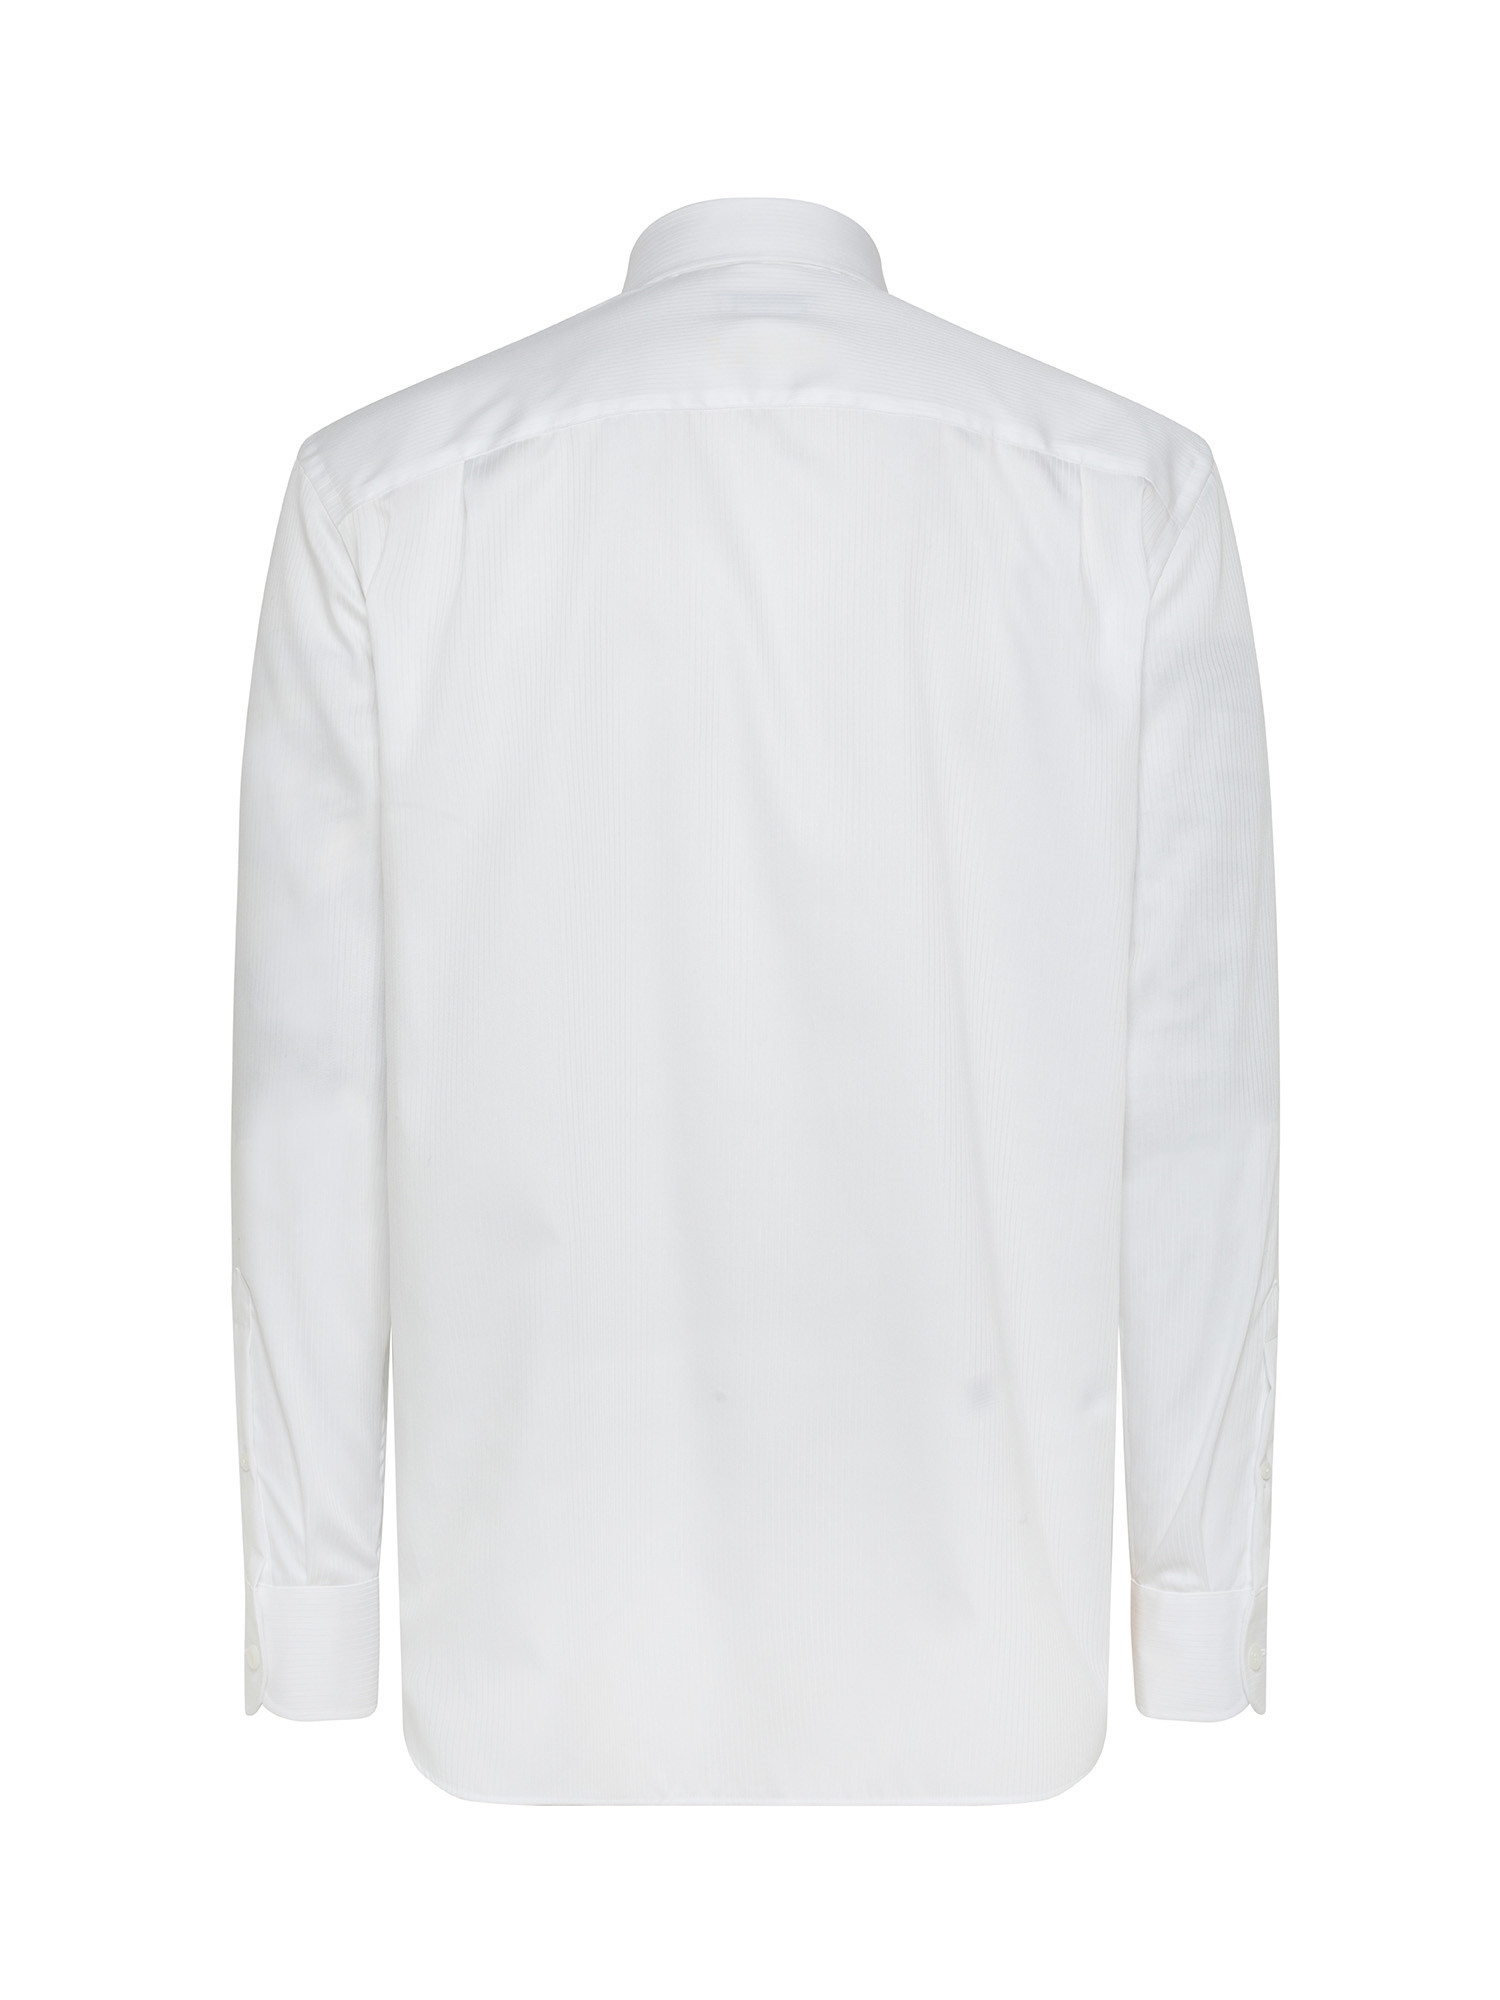 Luca D'Altieri - Regular fit shirt in pure cotton, White, large image number 1